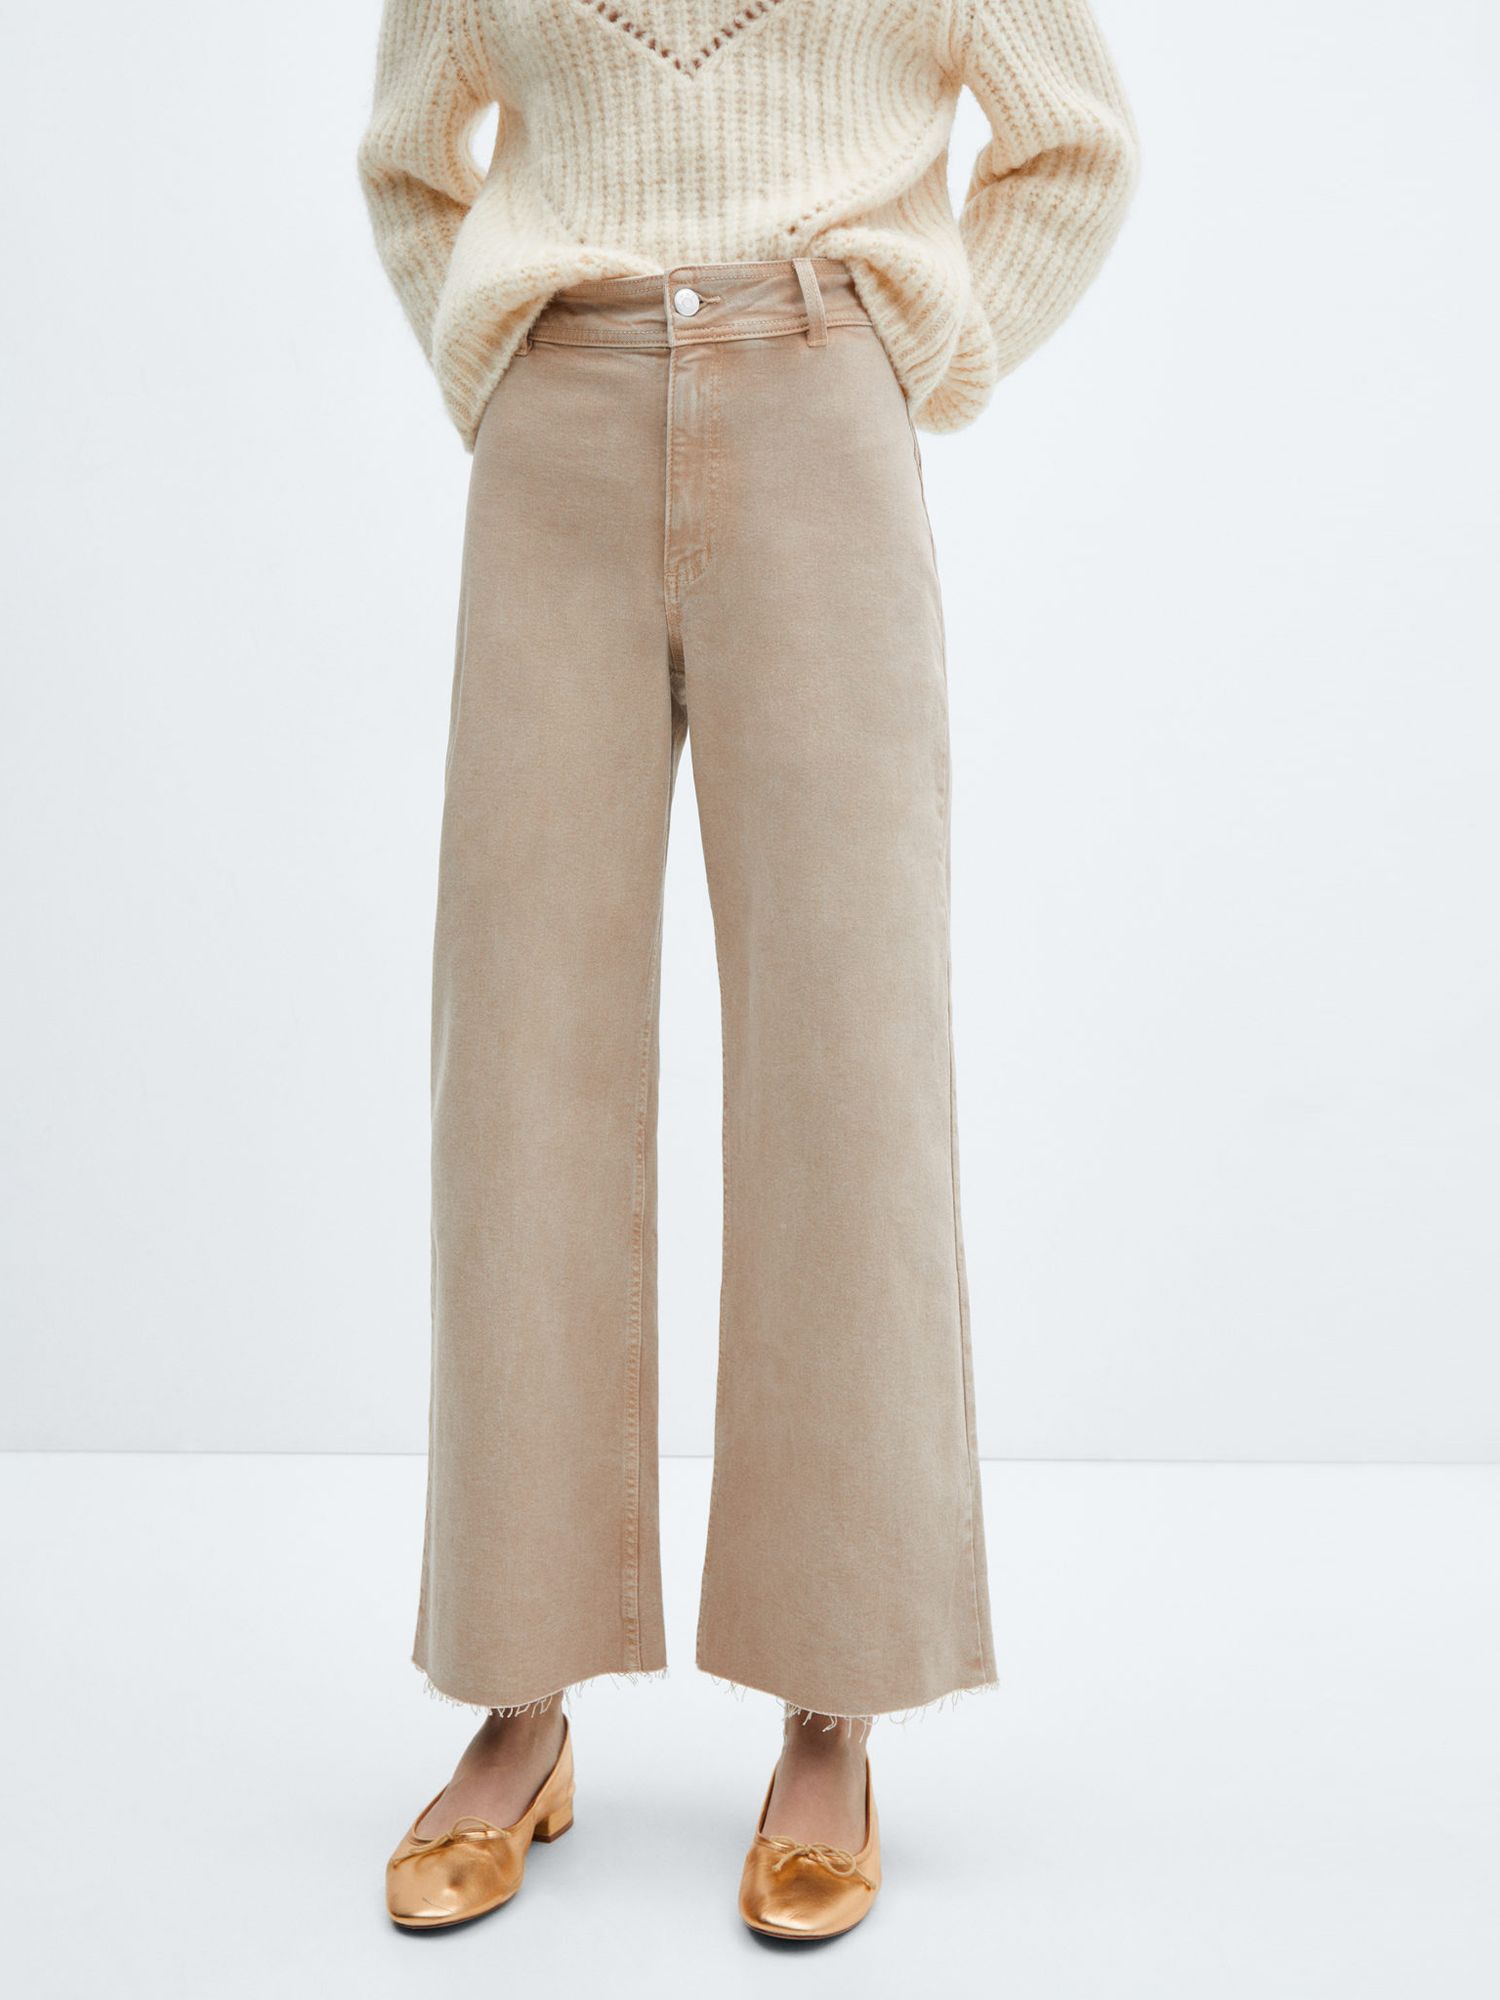 Buy Mango Catherin High Waist Culotte Jeans, Light Pastel Brown Online at johnlewis.com